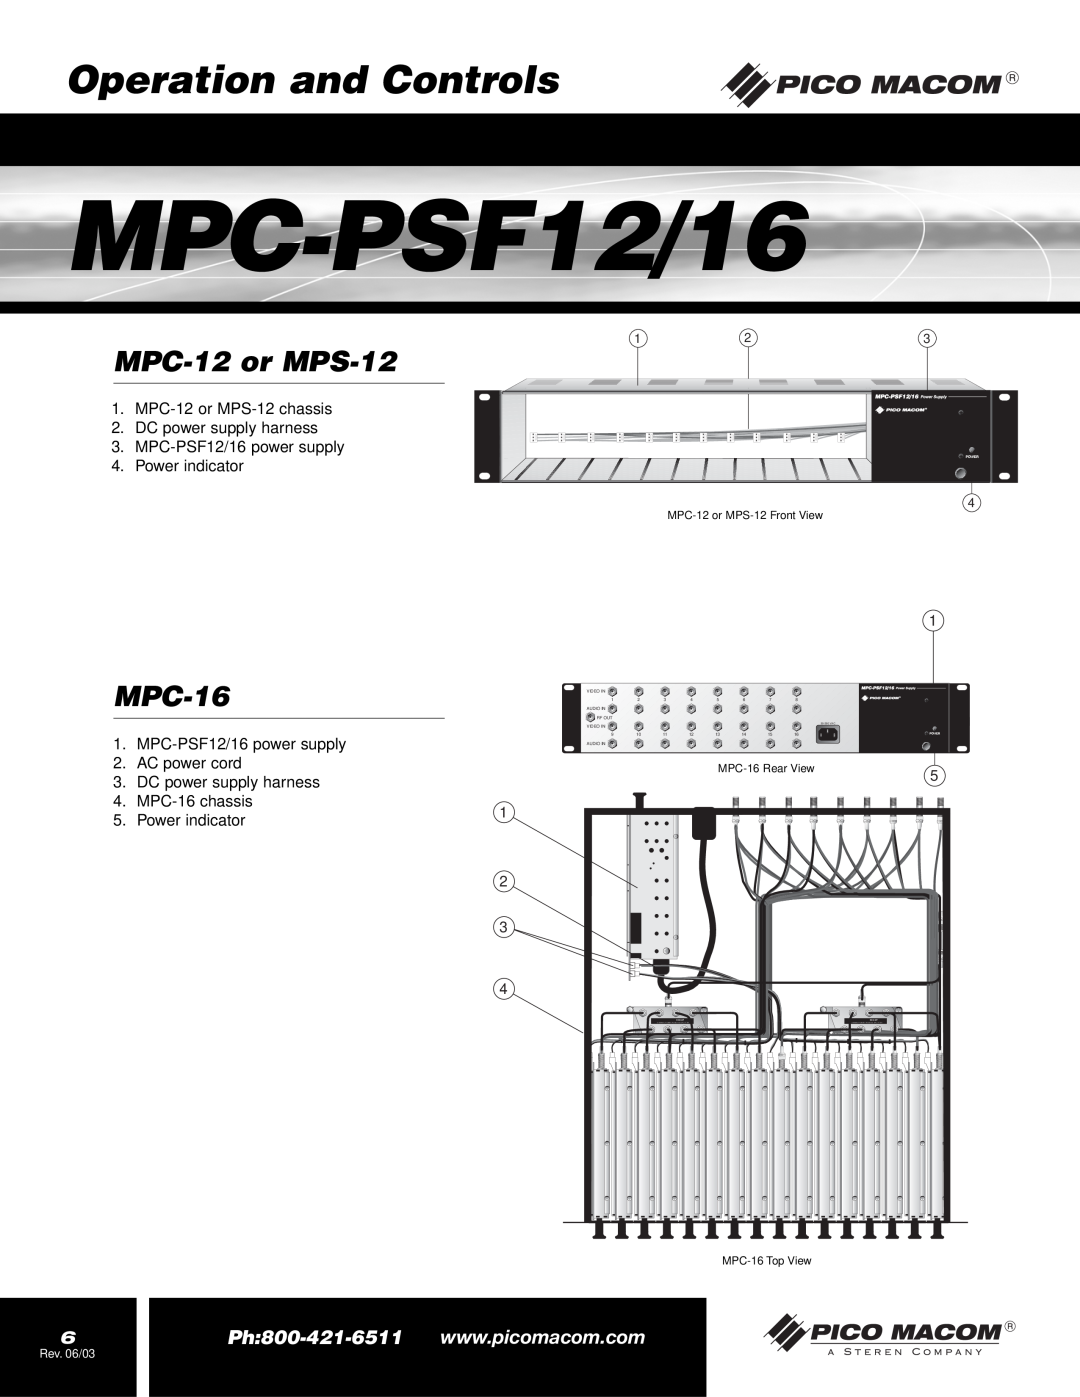 Pico Macom Operation and Controls, MPC-12 or MPS-12, MPC-16, MPC-PSF12/16, Power indicator, Rev. 06/03, Video In 